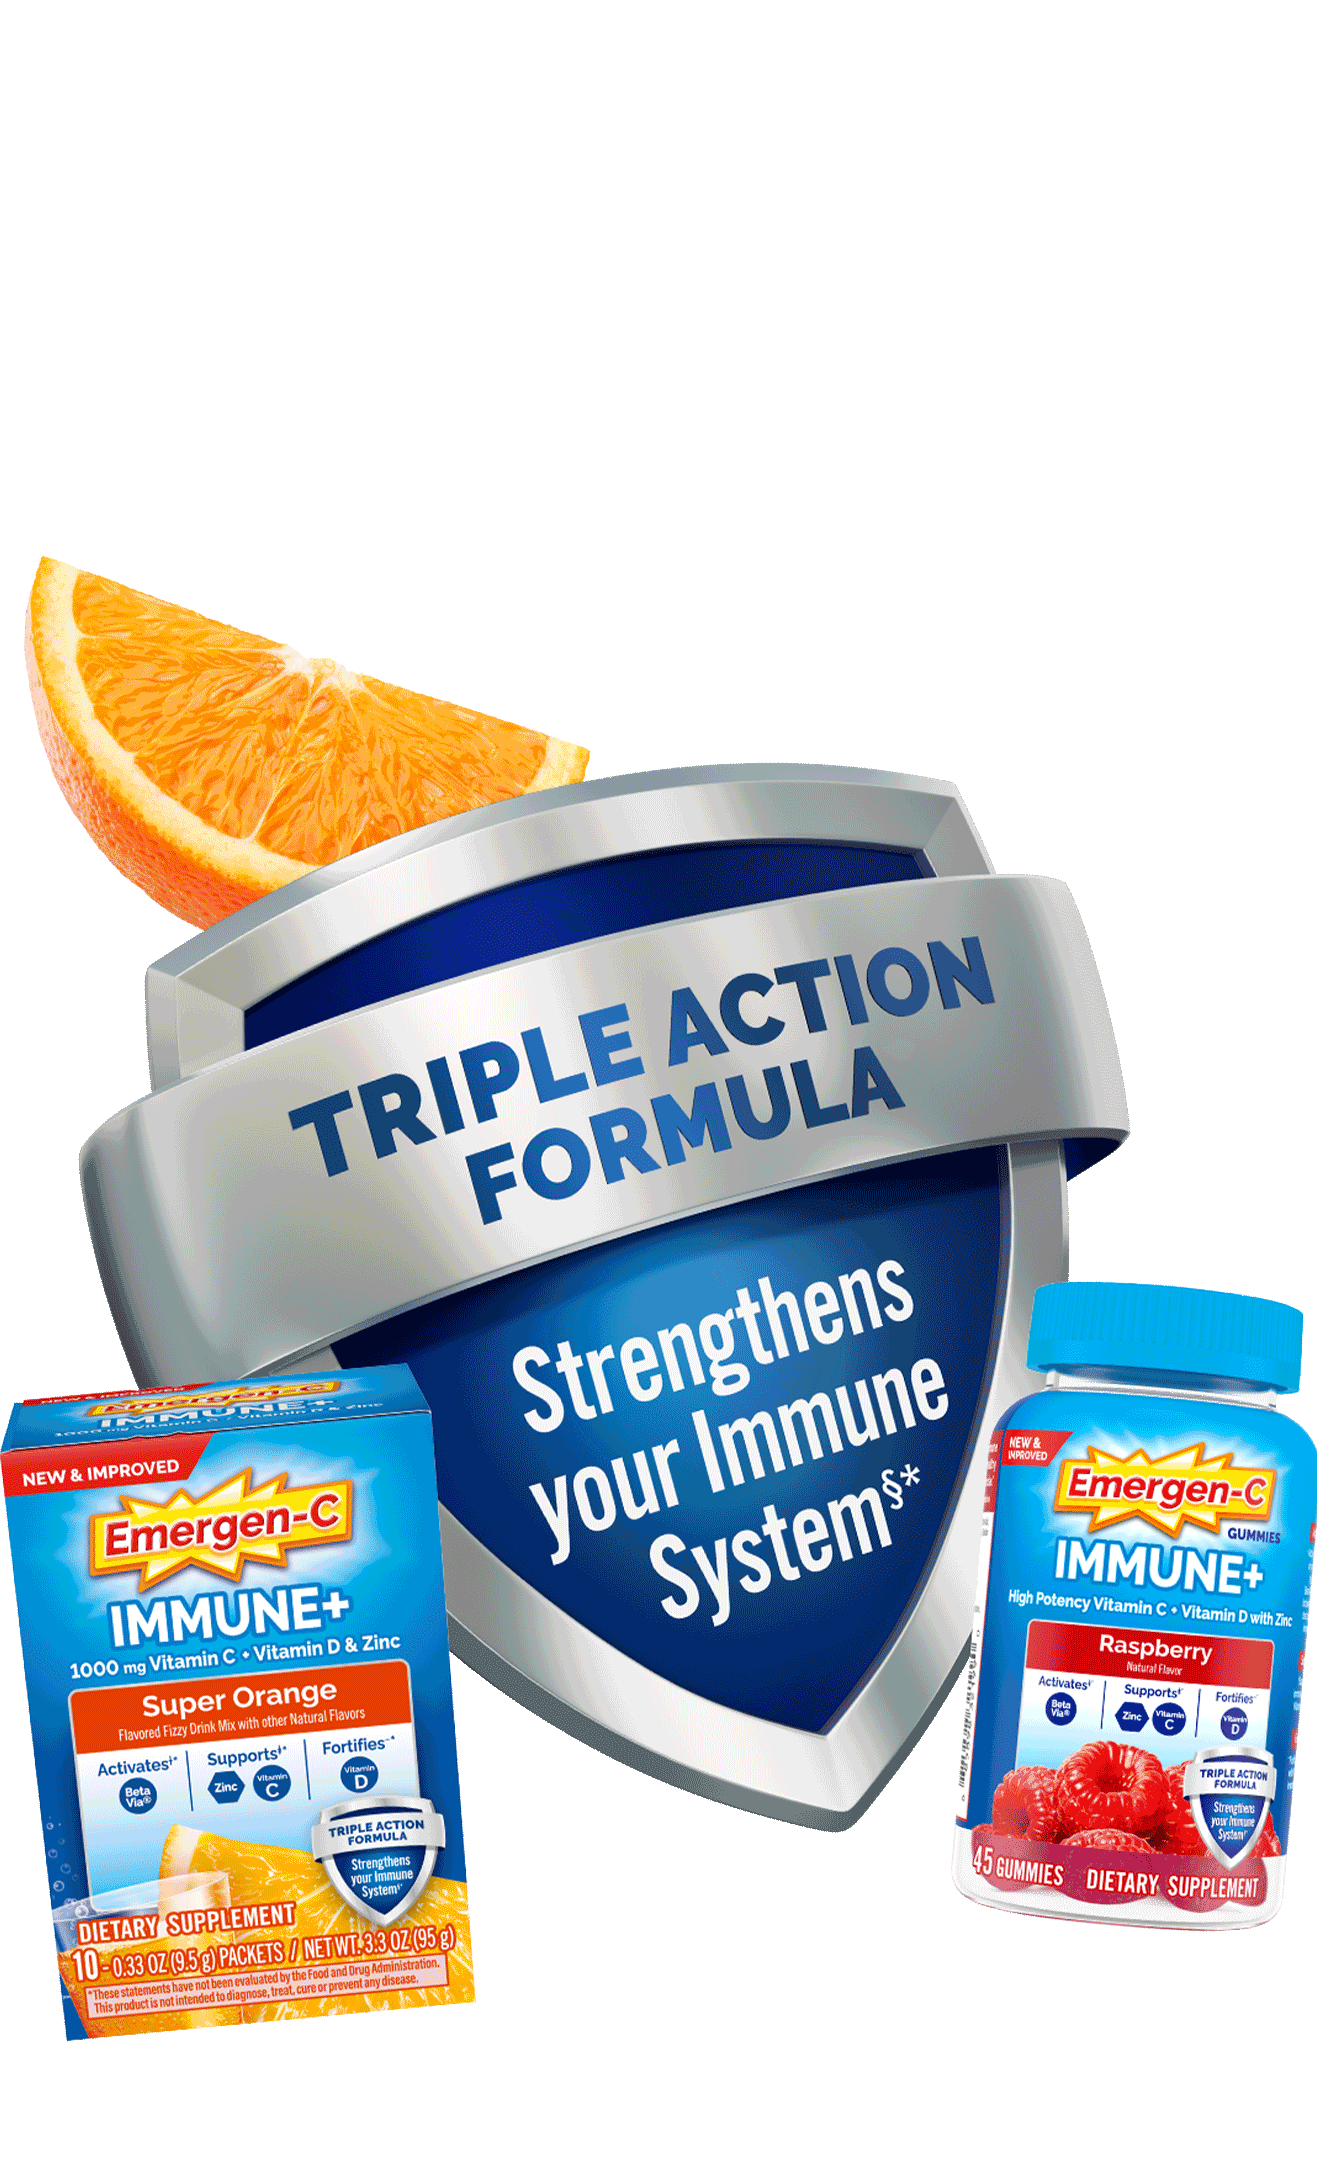 Triple Action shield with Emergen-C Immune+ products